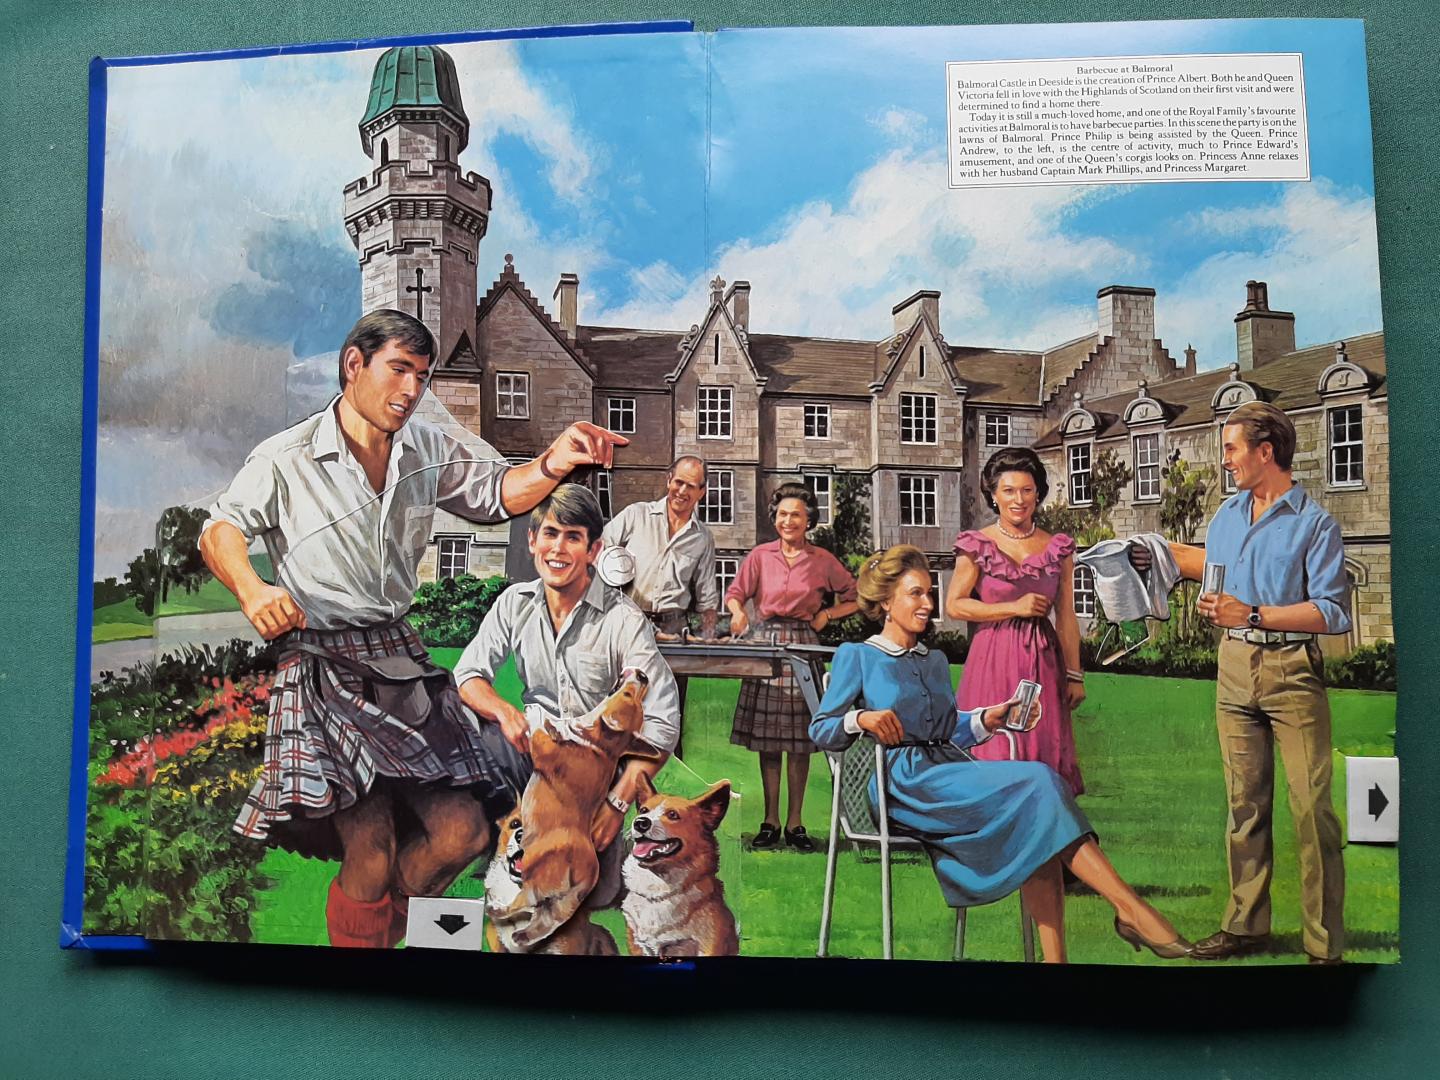 Montague-Smith, Patrick - The Royal Family Pop-up Book